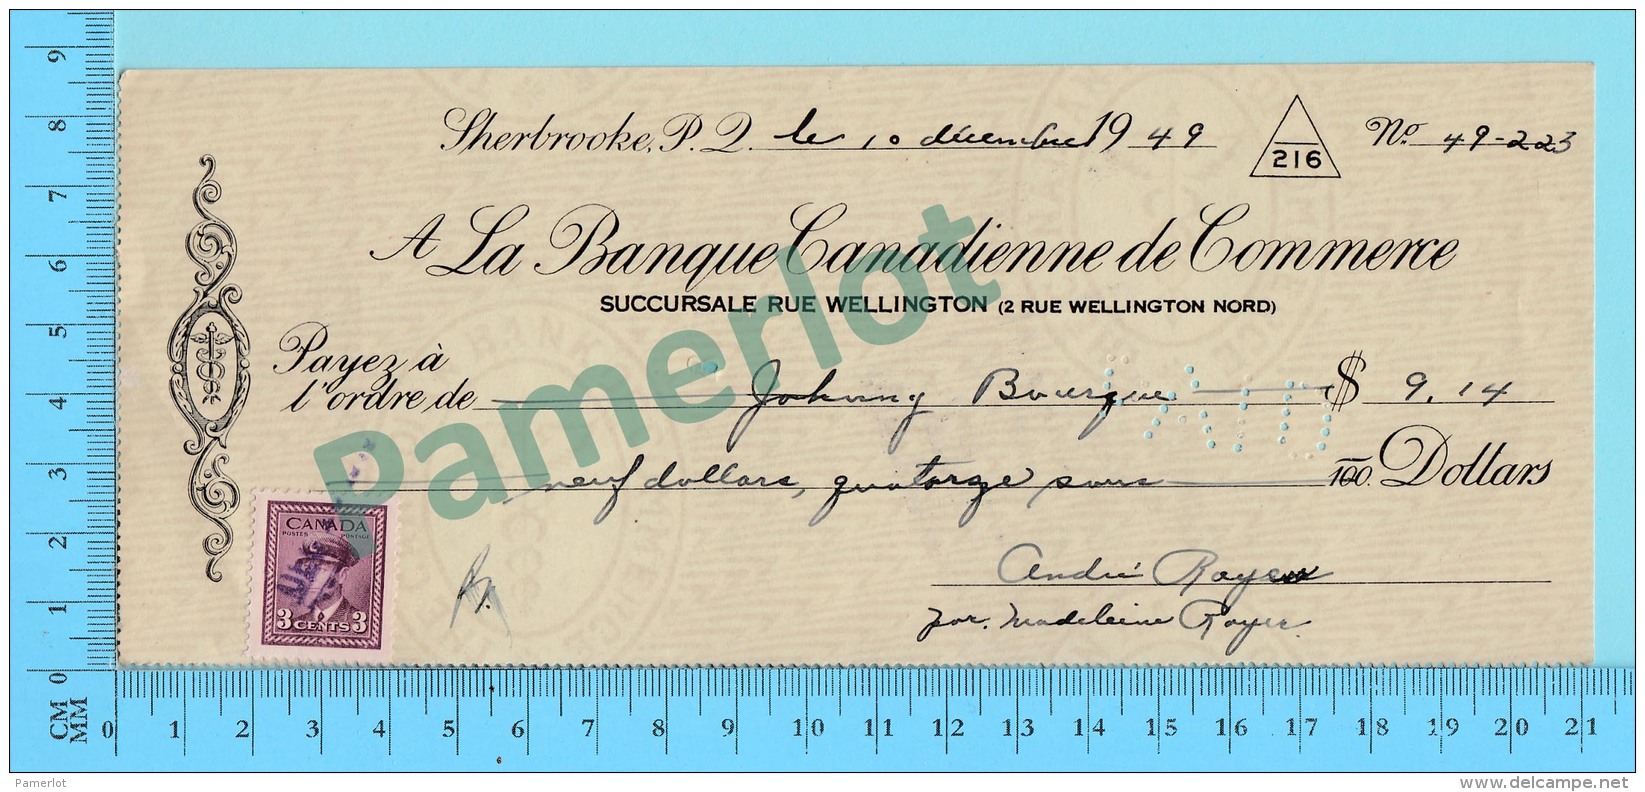 Sherbrooke Quebec 1947 Cheque -  $9.14, Ministre Johnny Bourque Union Nationale Gouv. Duplessis  -2 Scans - Cheques & Traveler's Cheques